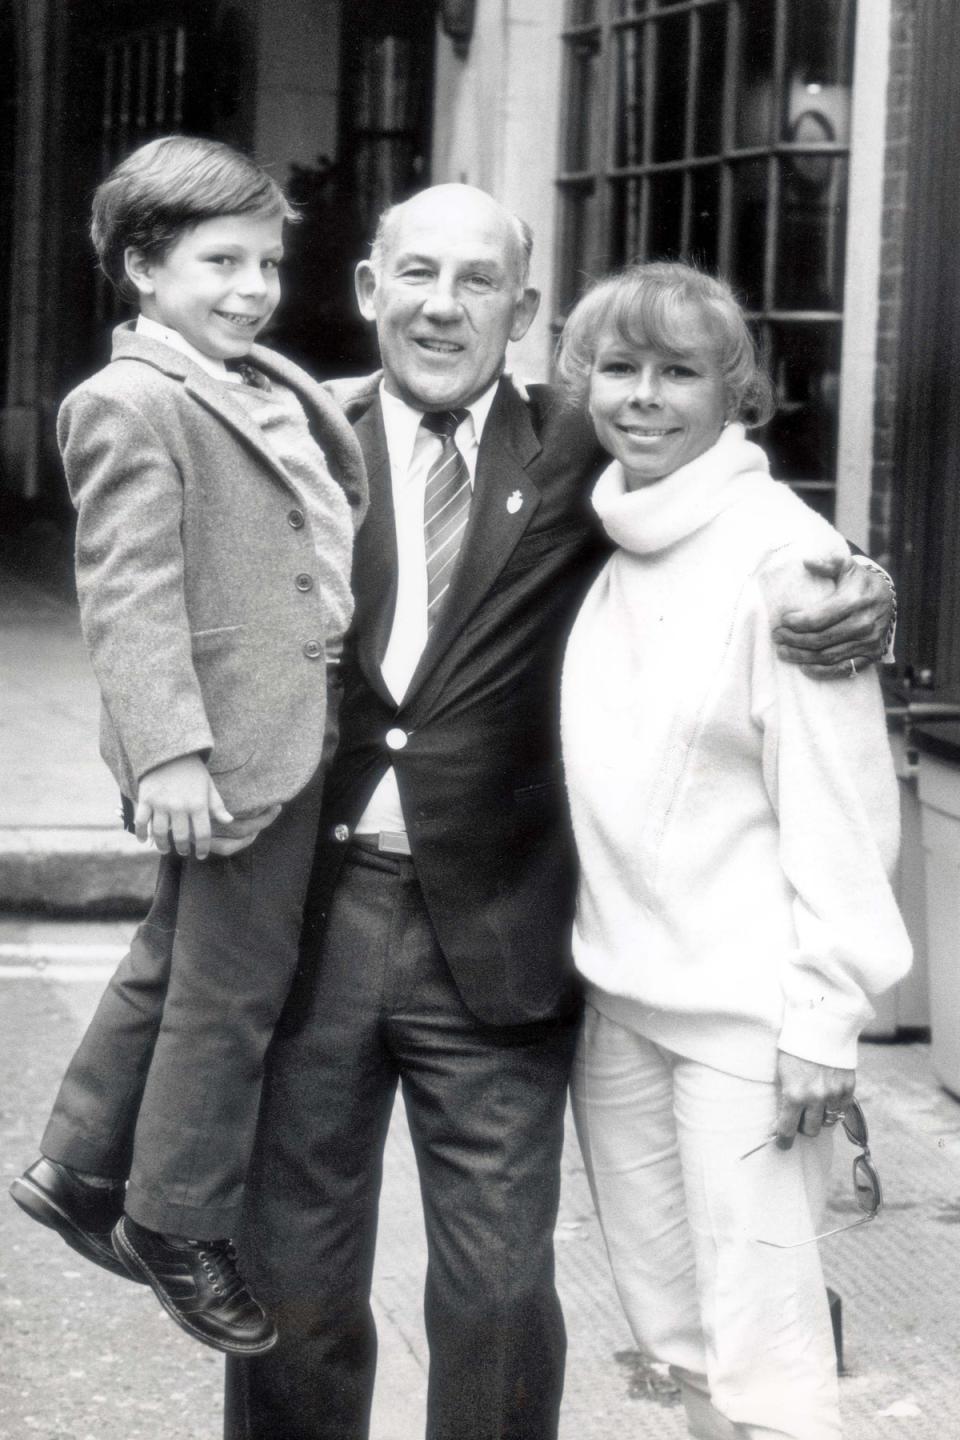 Racing start: Elliot with his parents, Sir Stirling Moss and Lady Susie Moss (Rex Features)